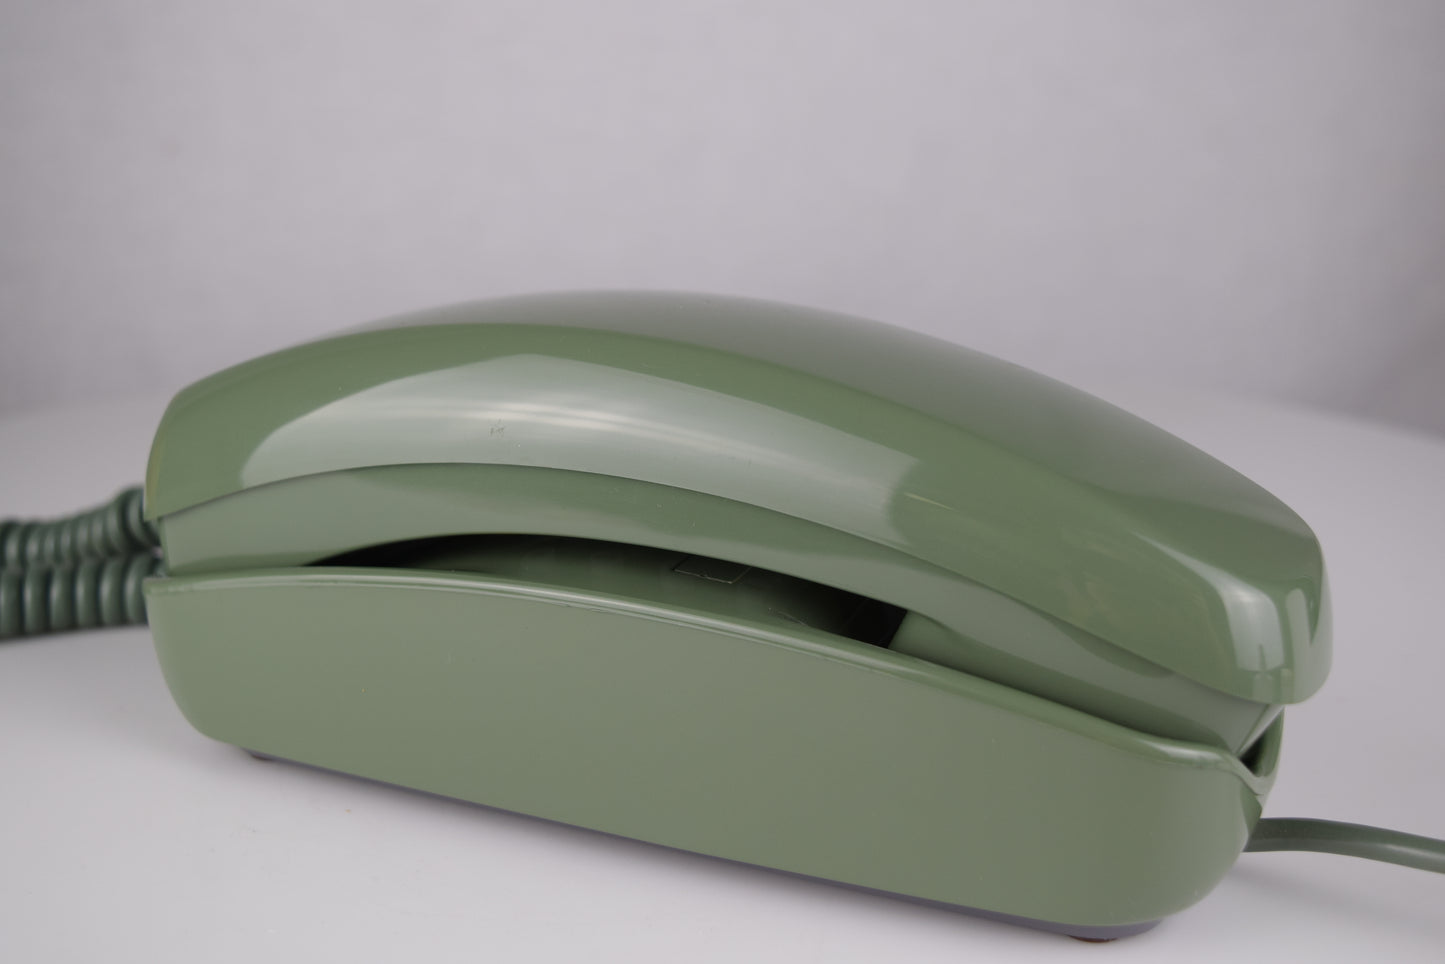 Trimline Touch Tone Wall Phone - Green